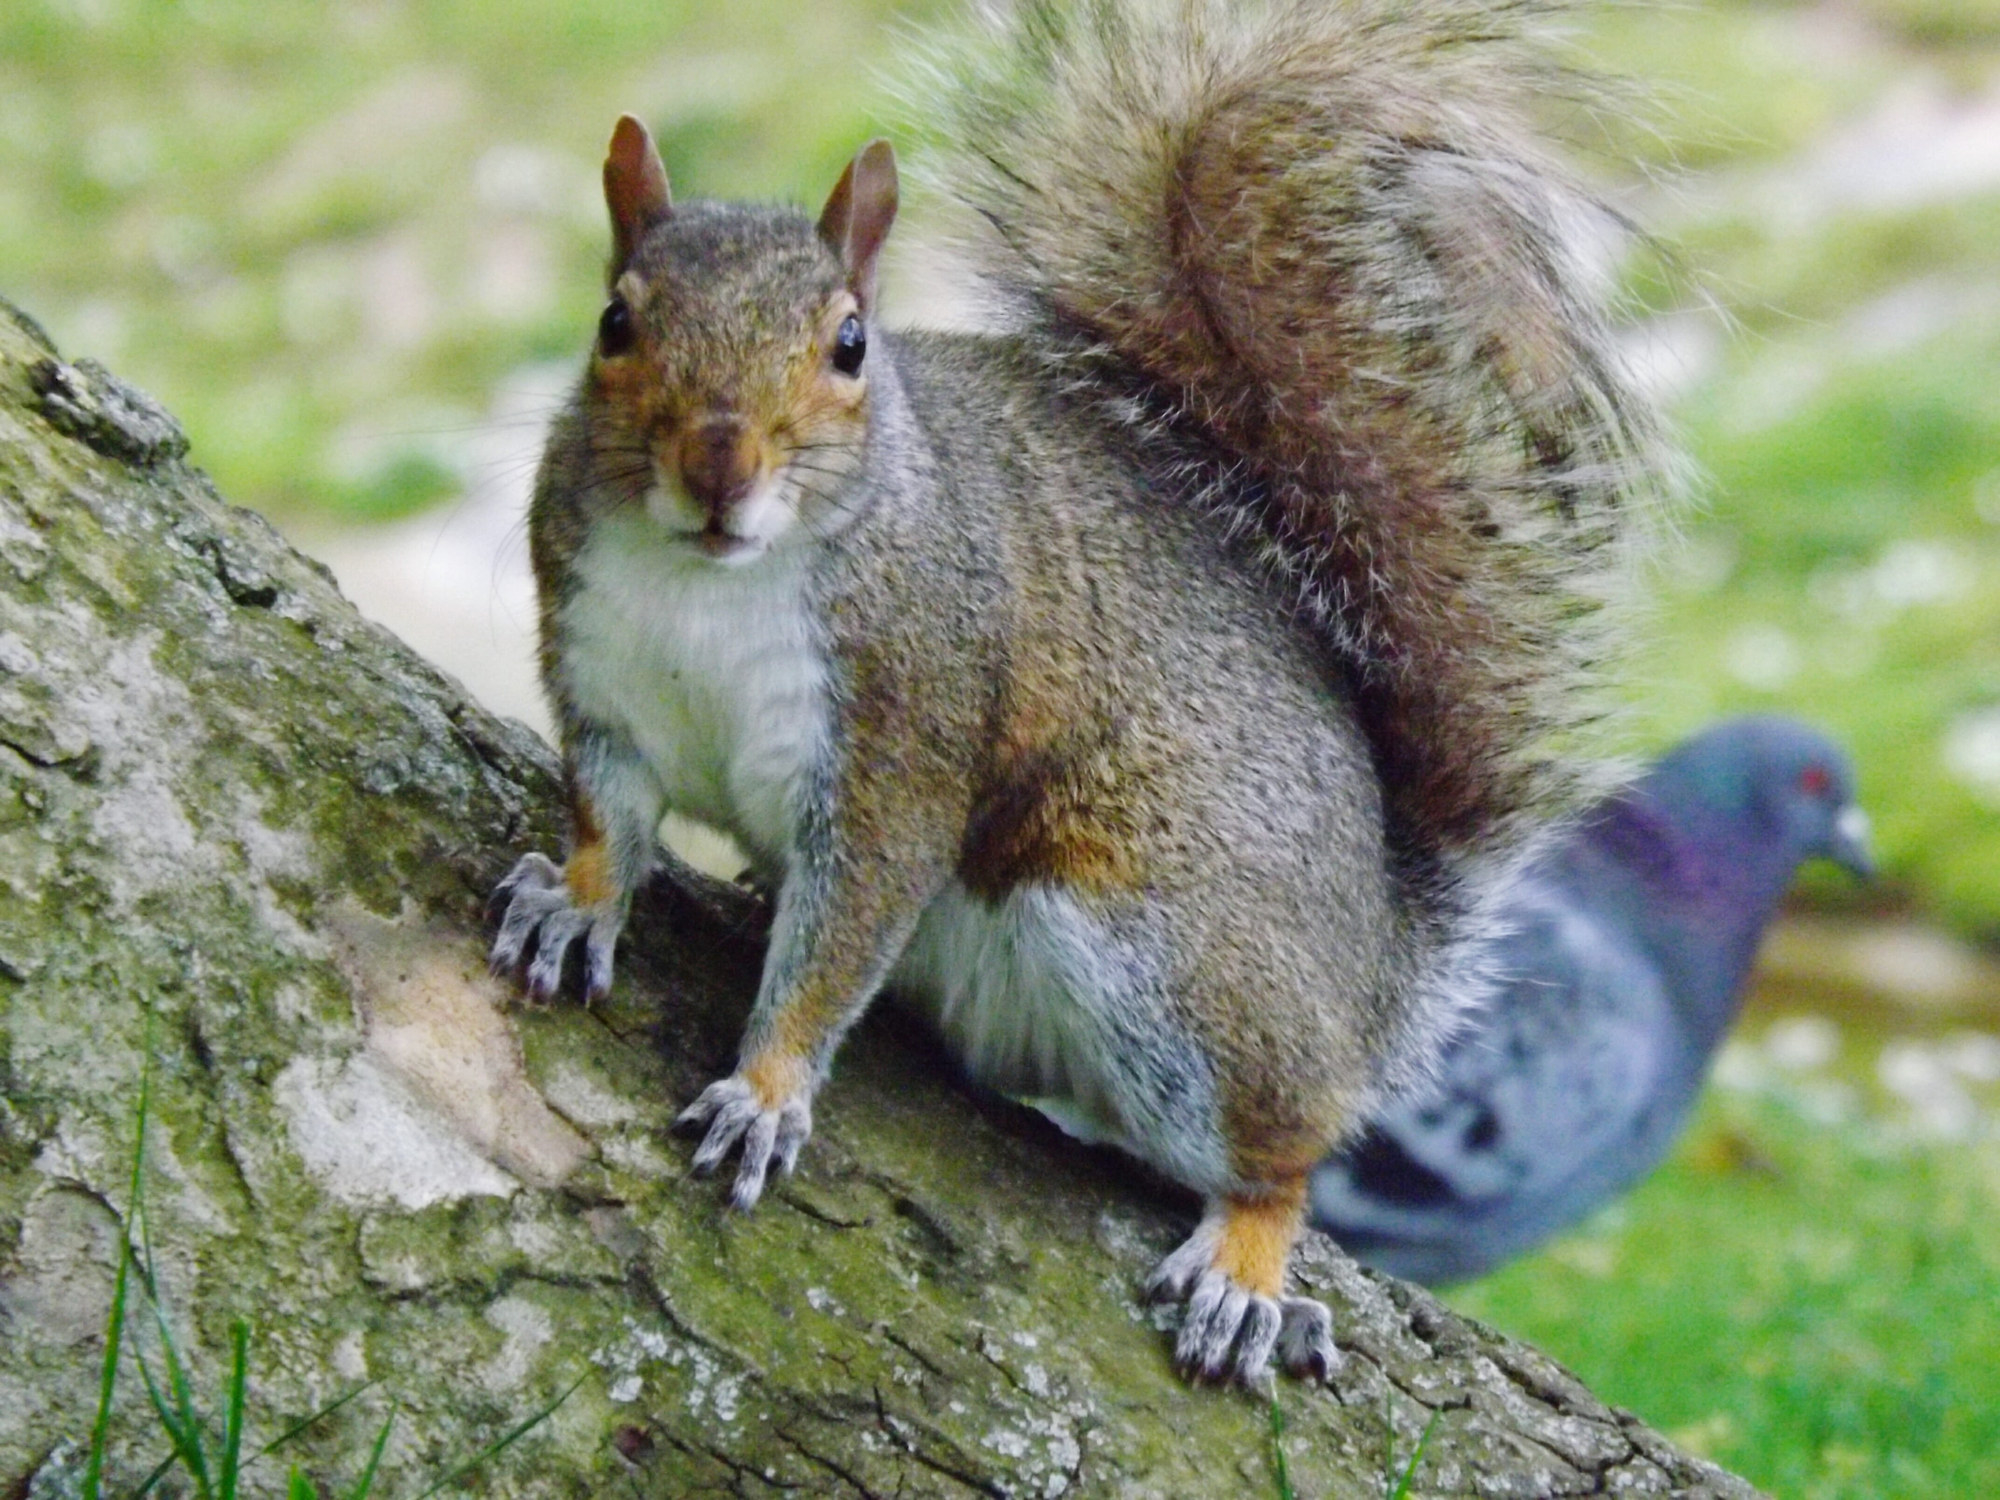 Close-up of a squirrel on a tree bark